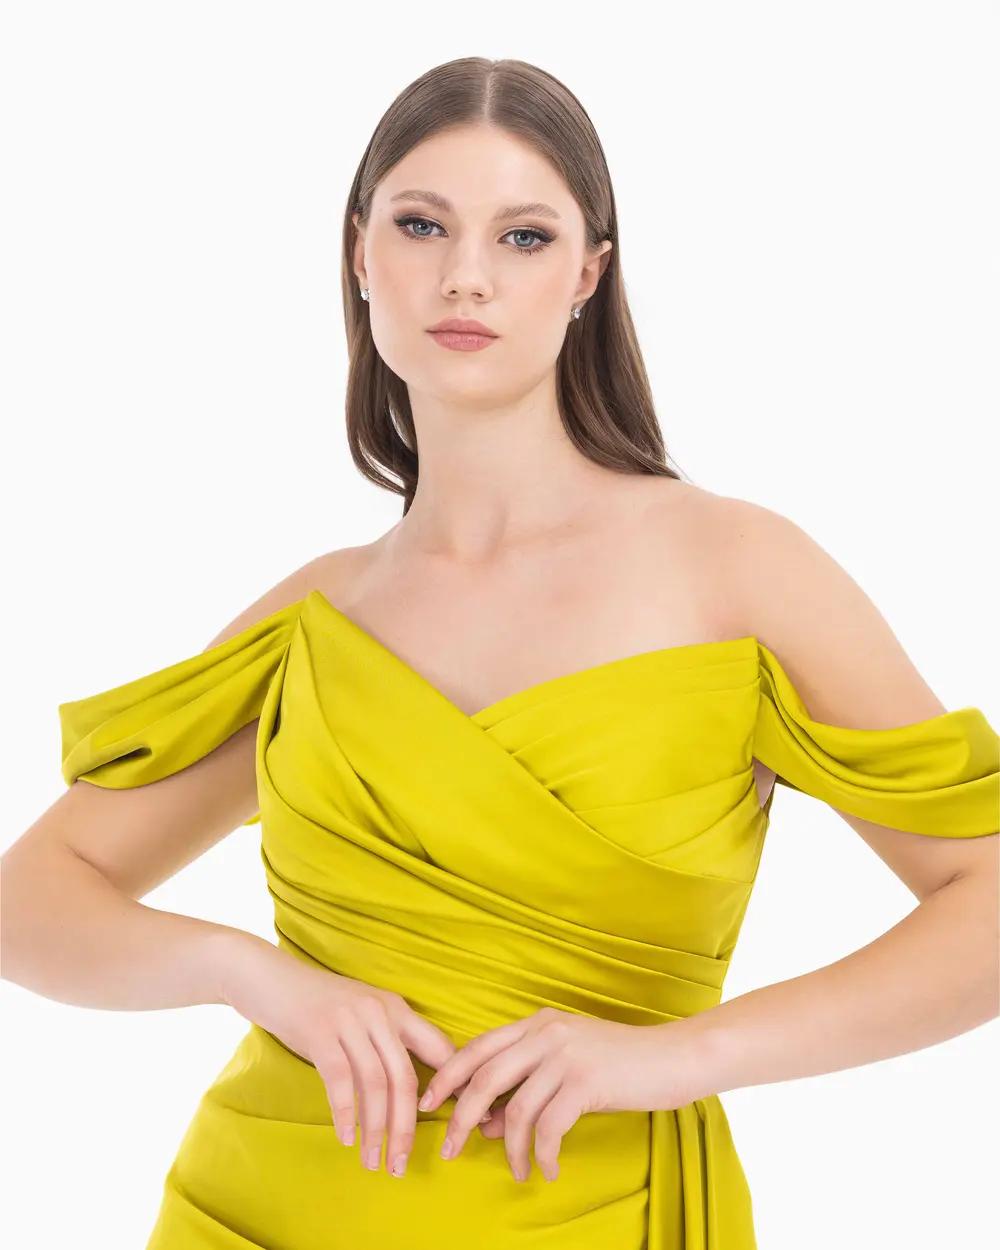 Double Breasted Neck Slit Satin Woven Evening Dress